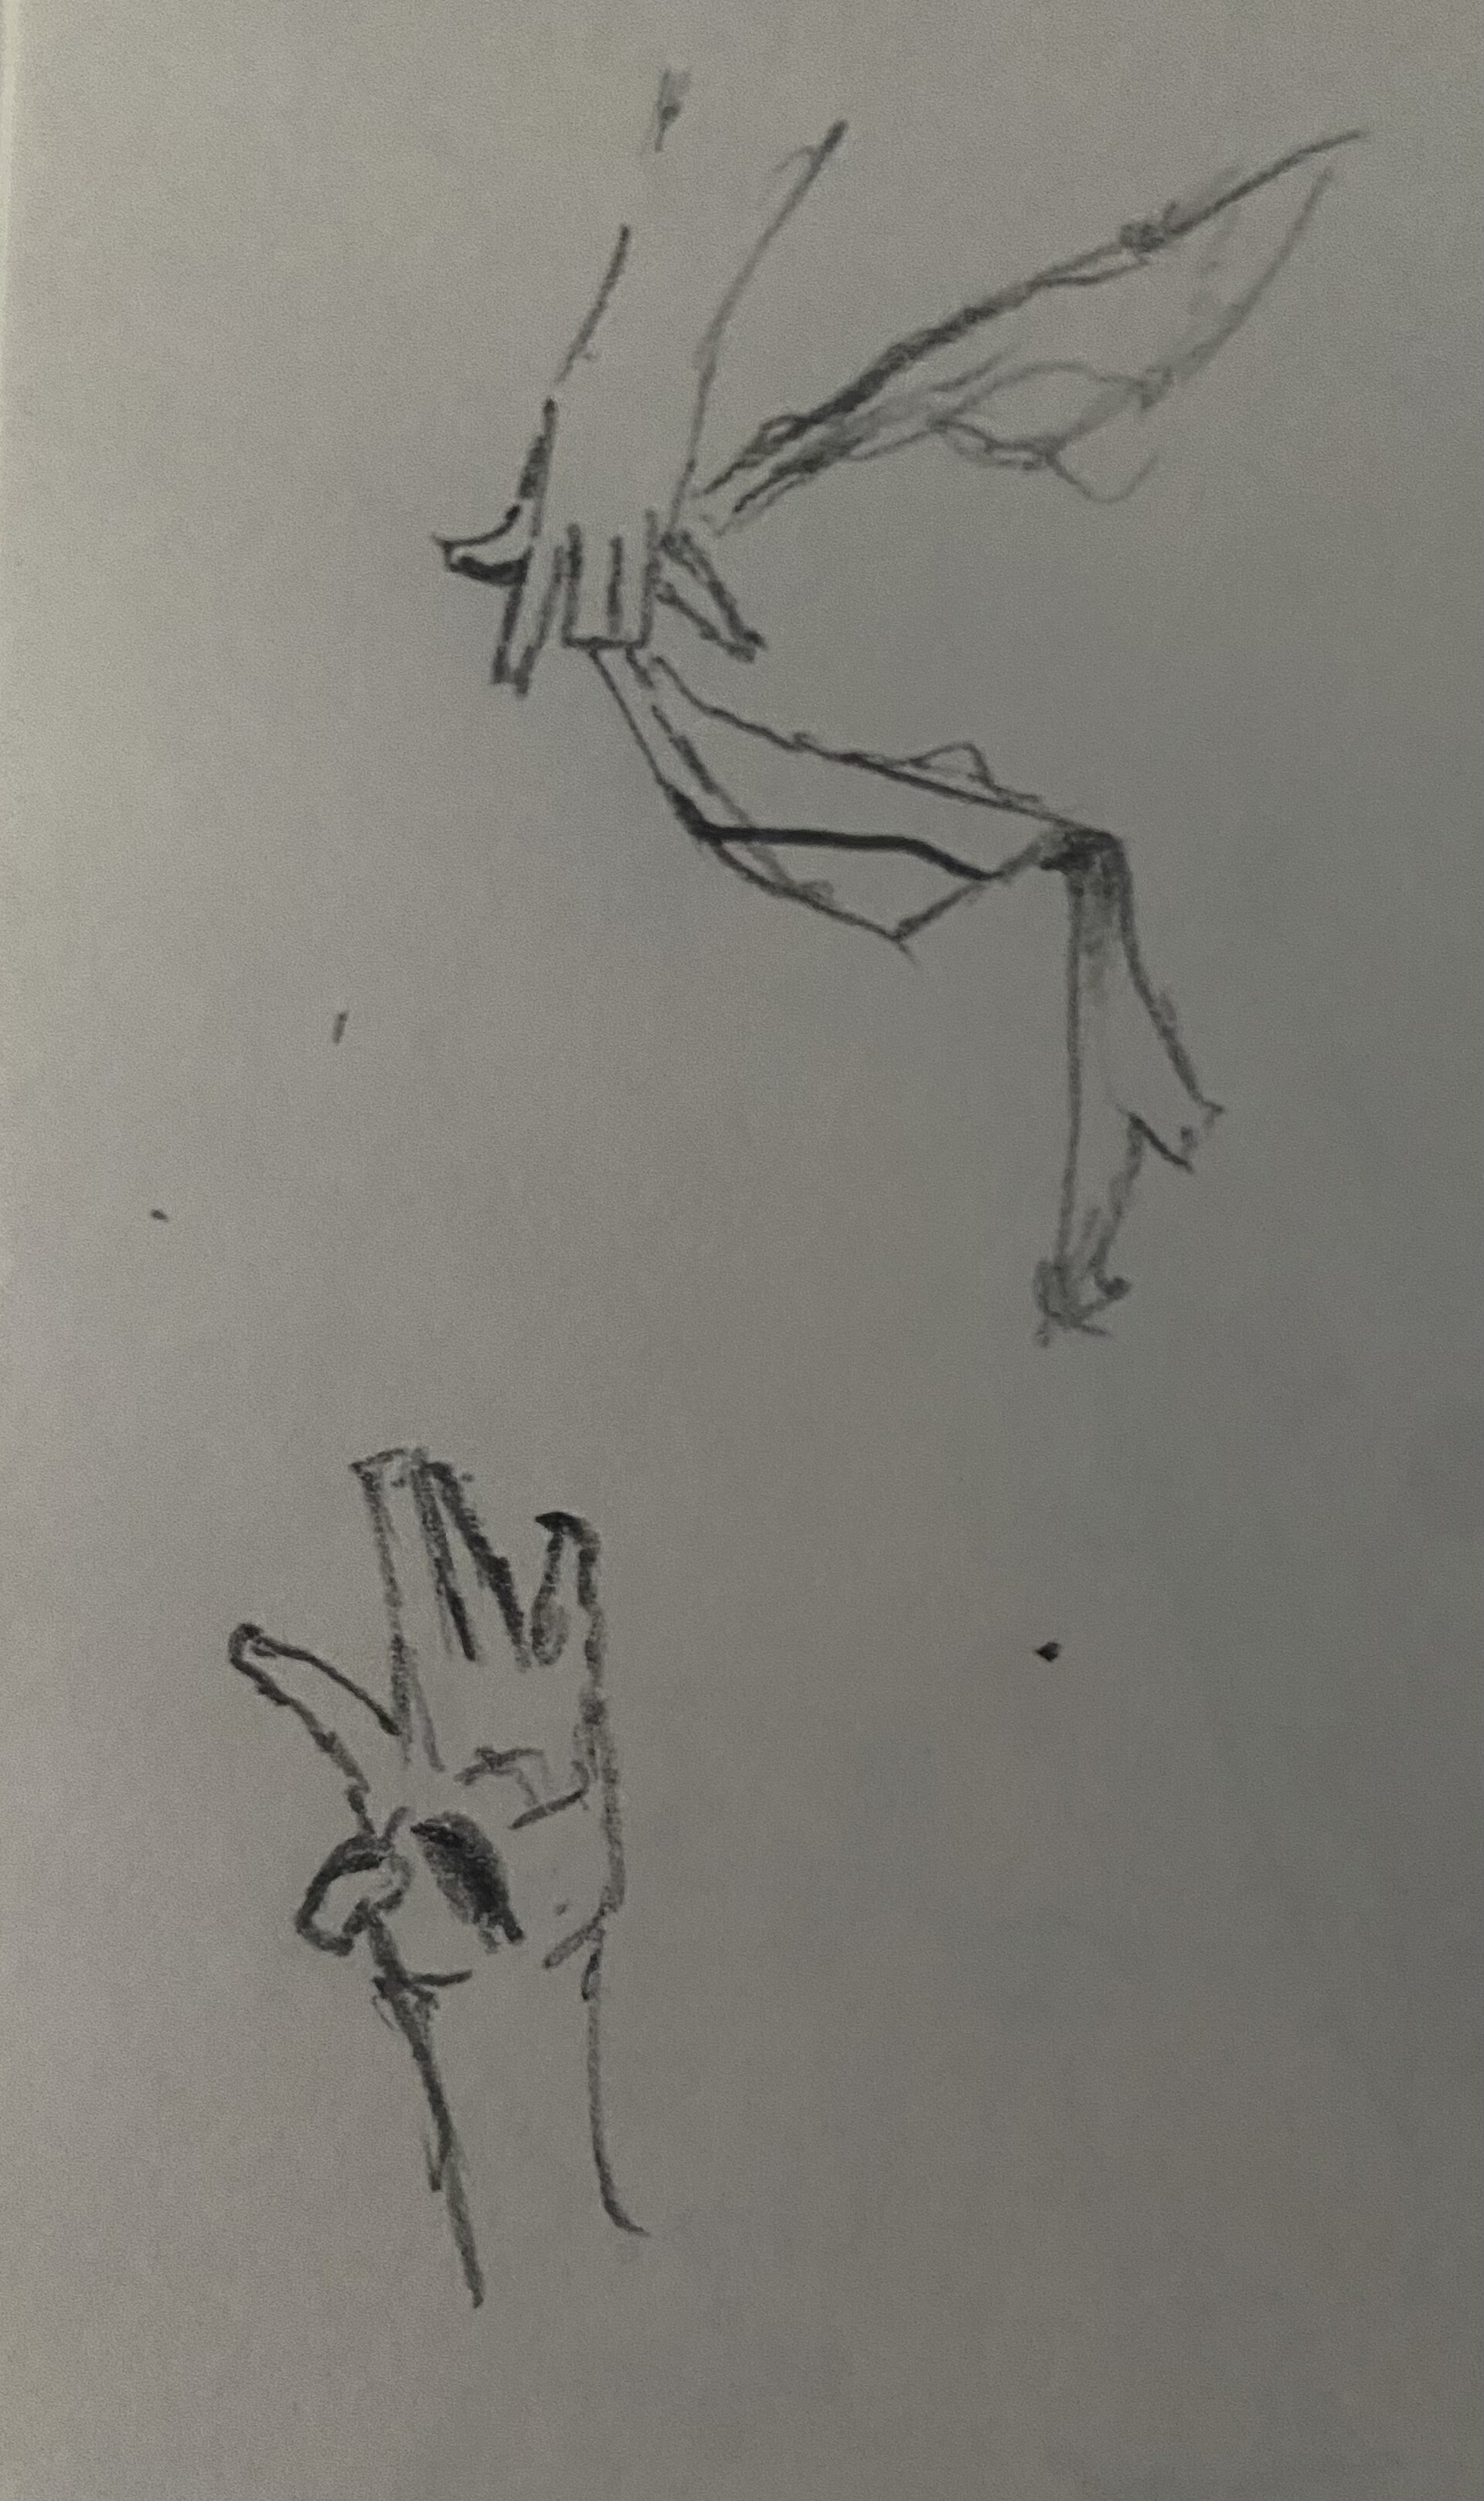 anime hand reaching out drawing